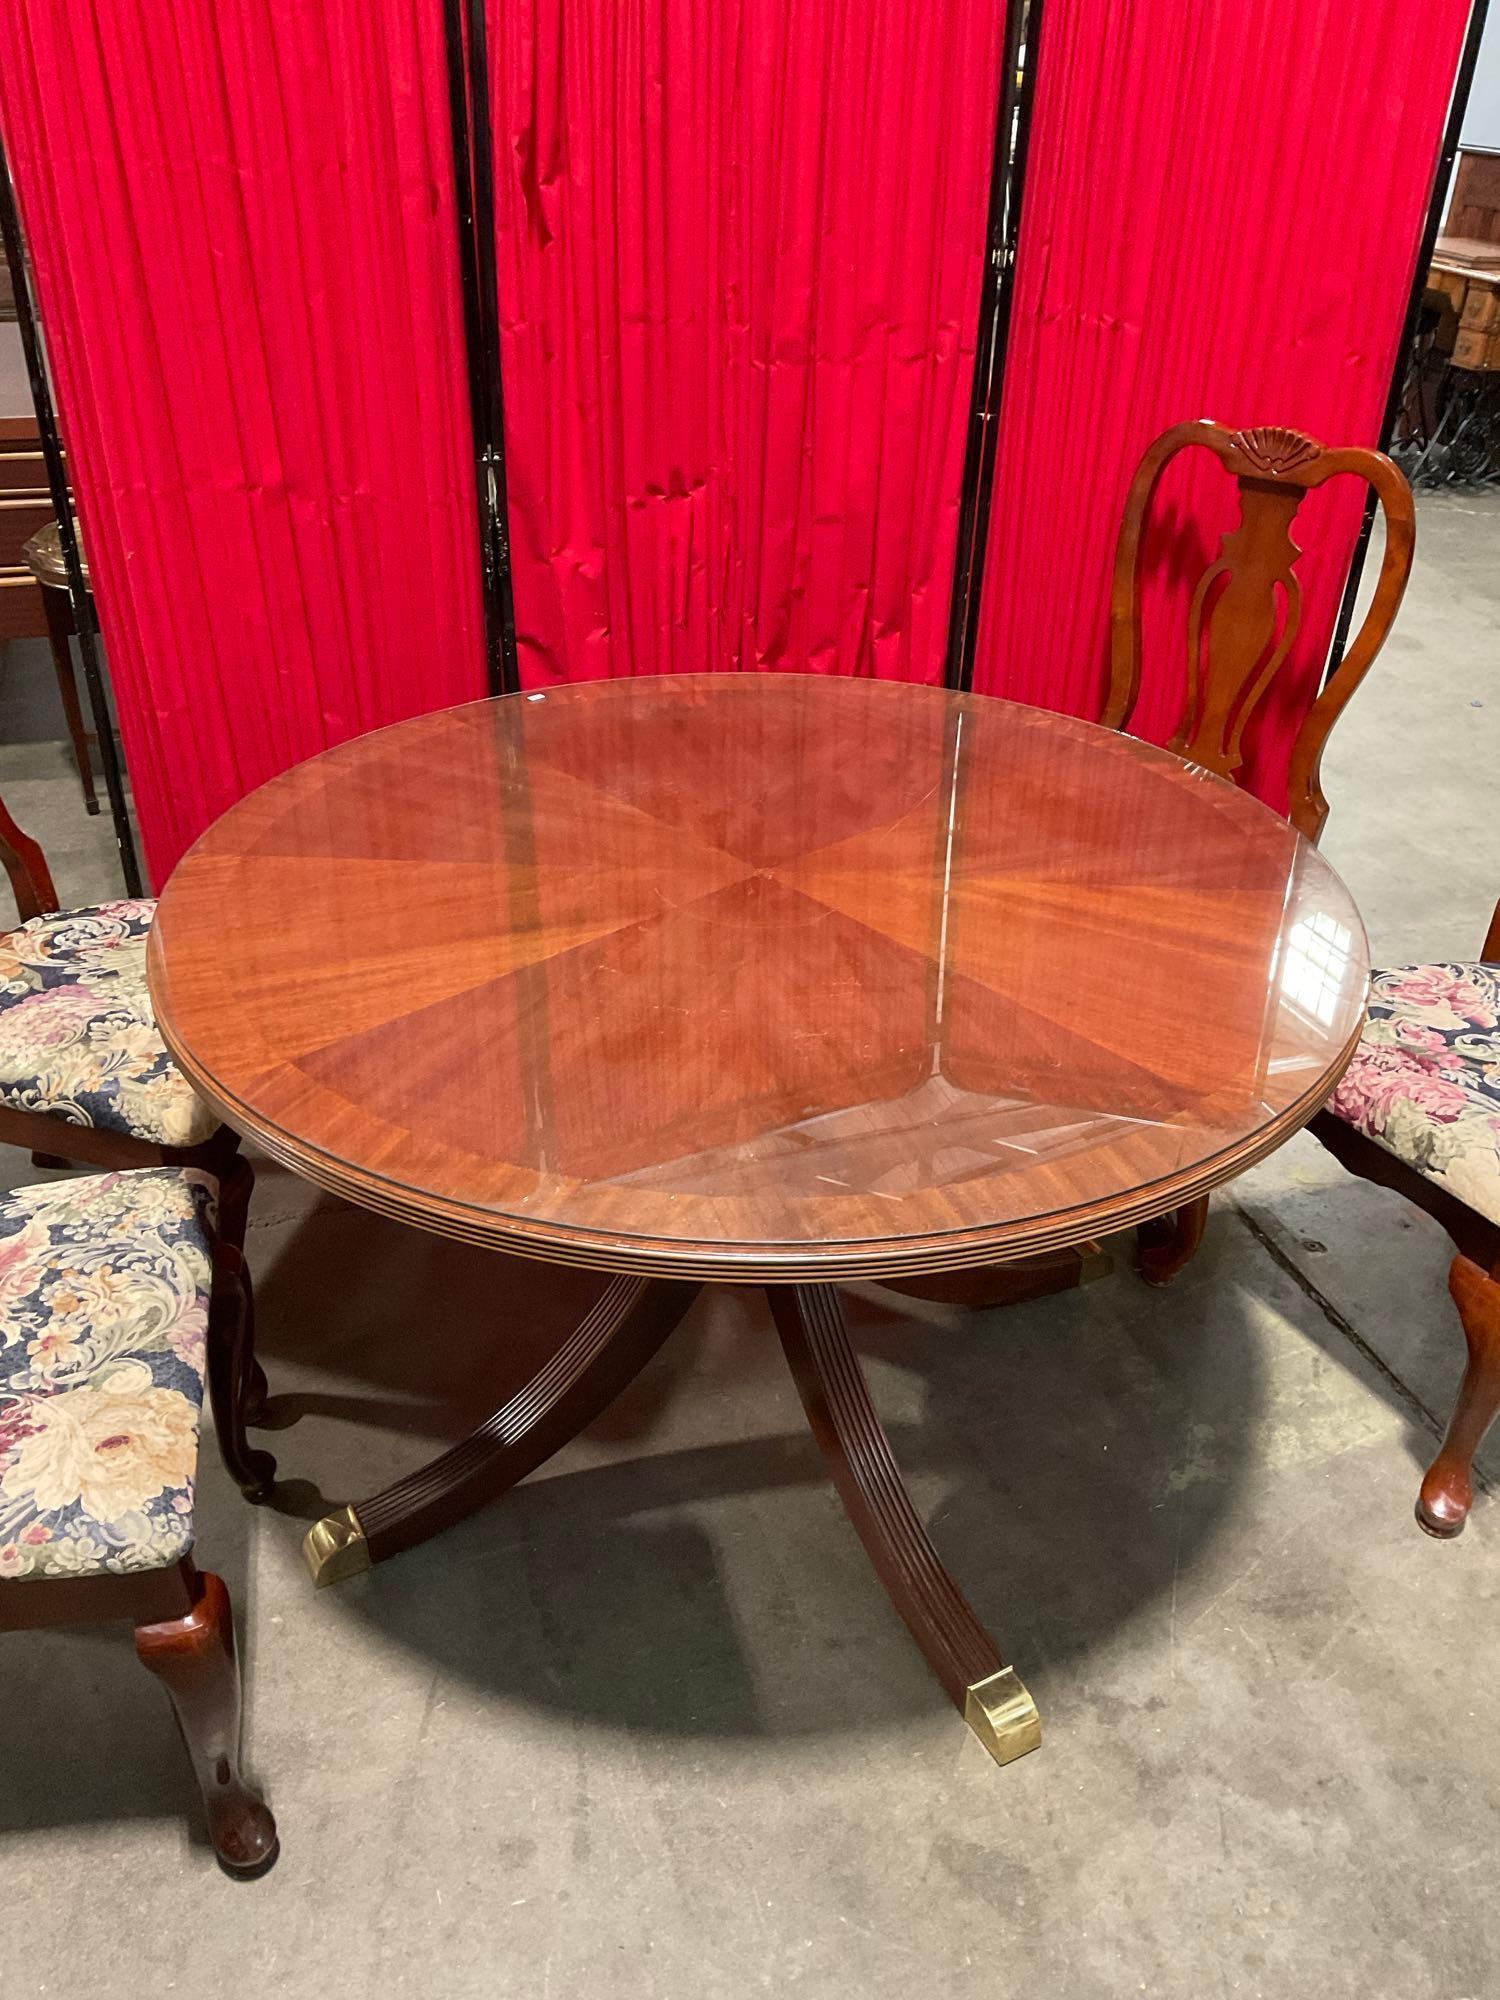 Vintage Round Glass Topped Wooden Dining Table & 4 Lyre Back Buffet Chairs w/ Floral Seats. See